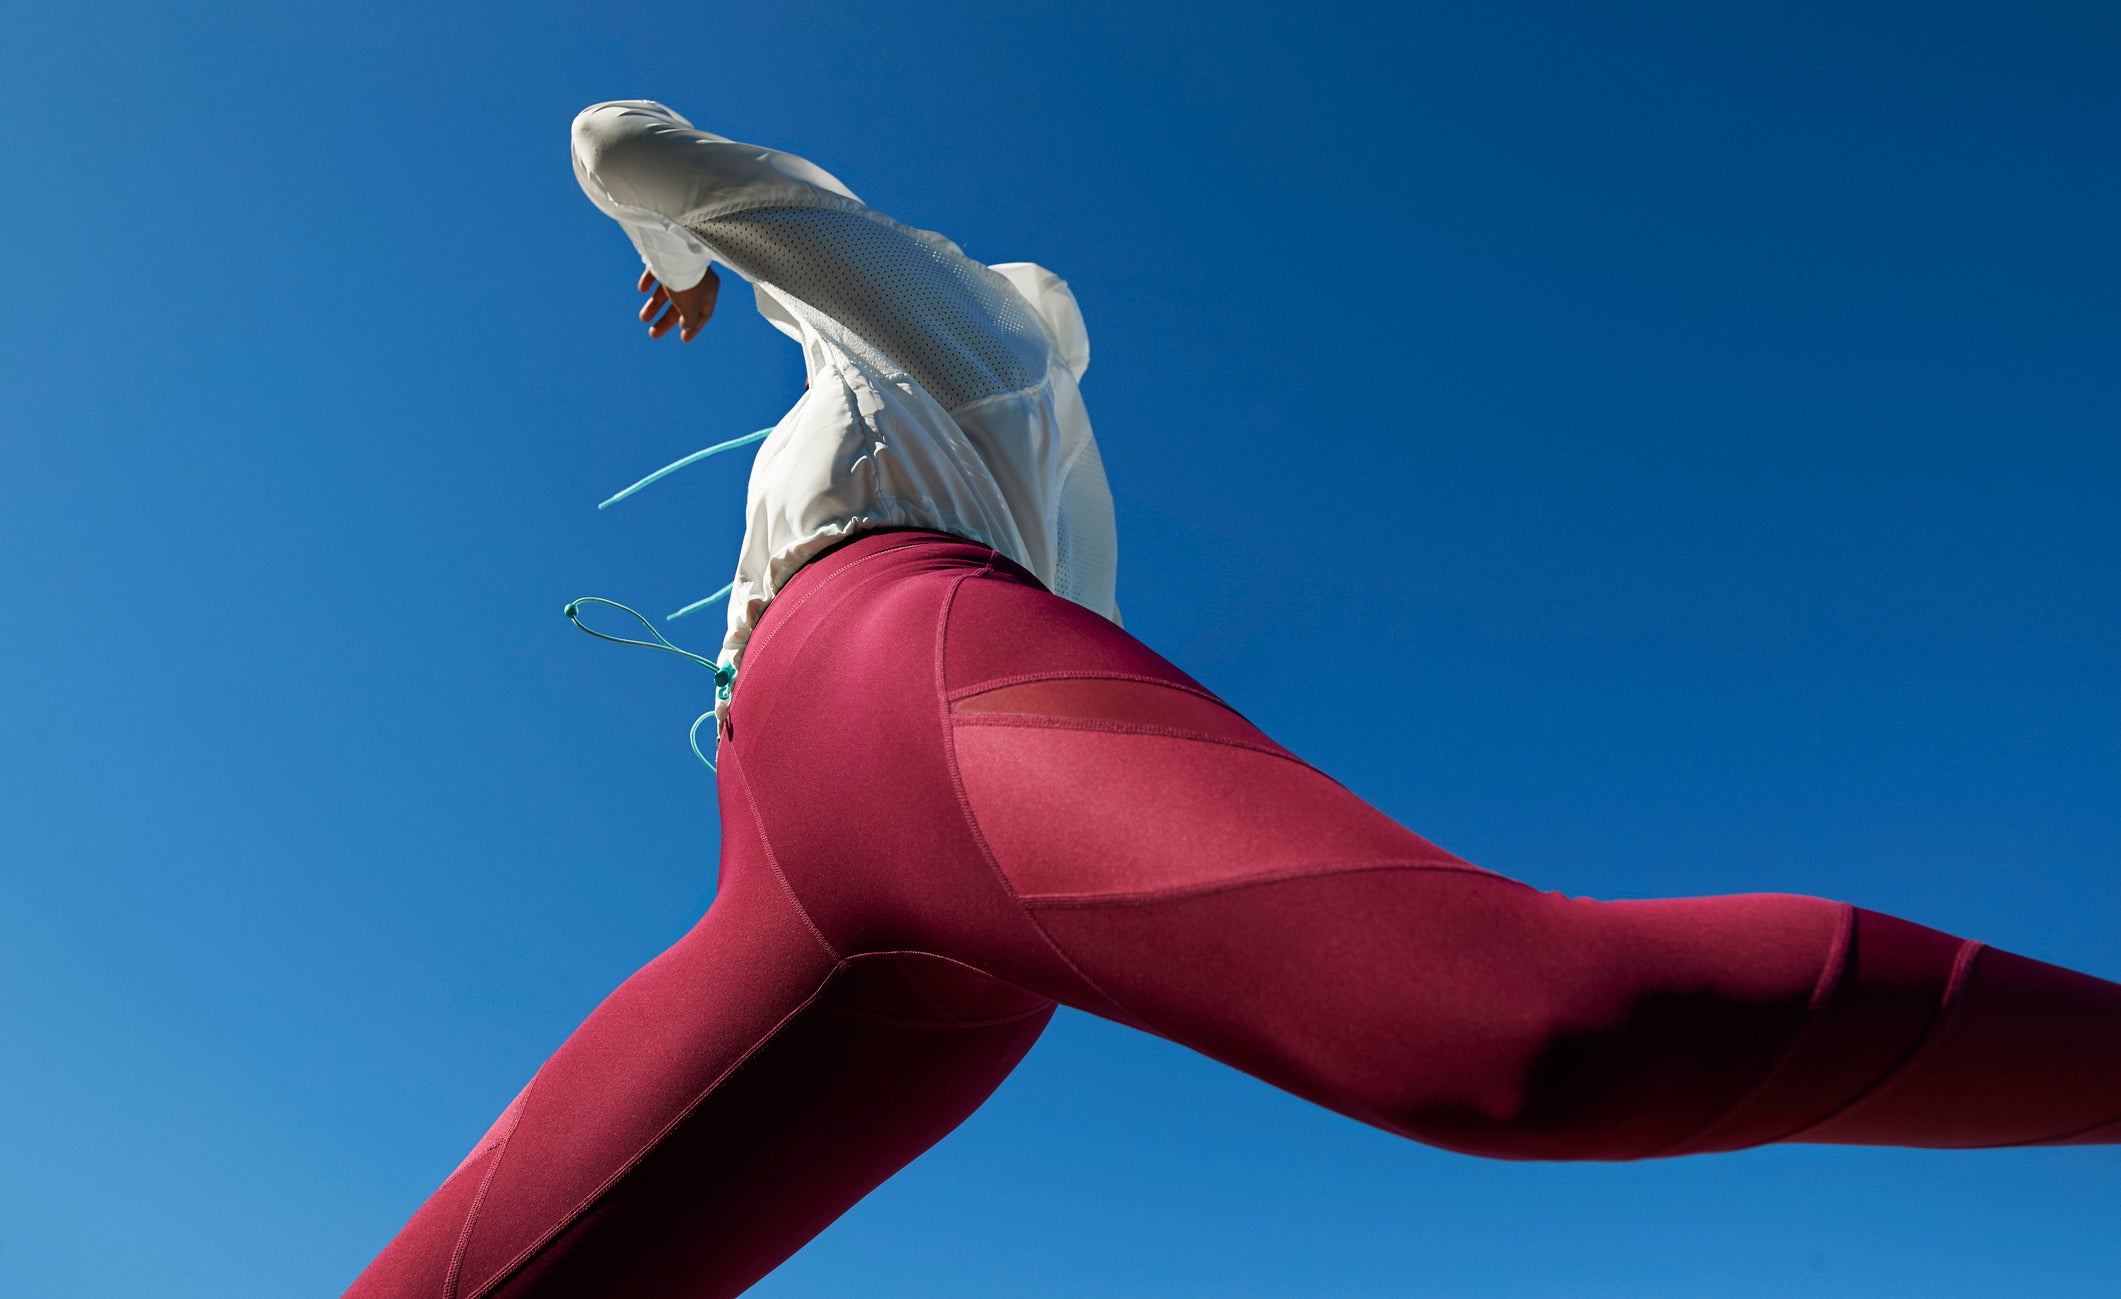 lululemon New Year Finds for Men and Women: Shop Specials on Align Leggings,  Joggers and More